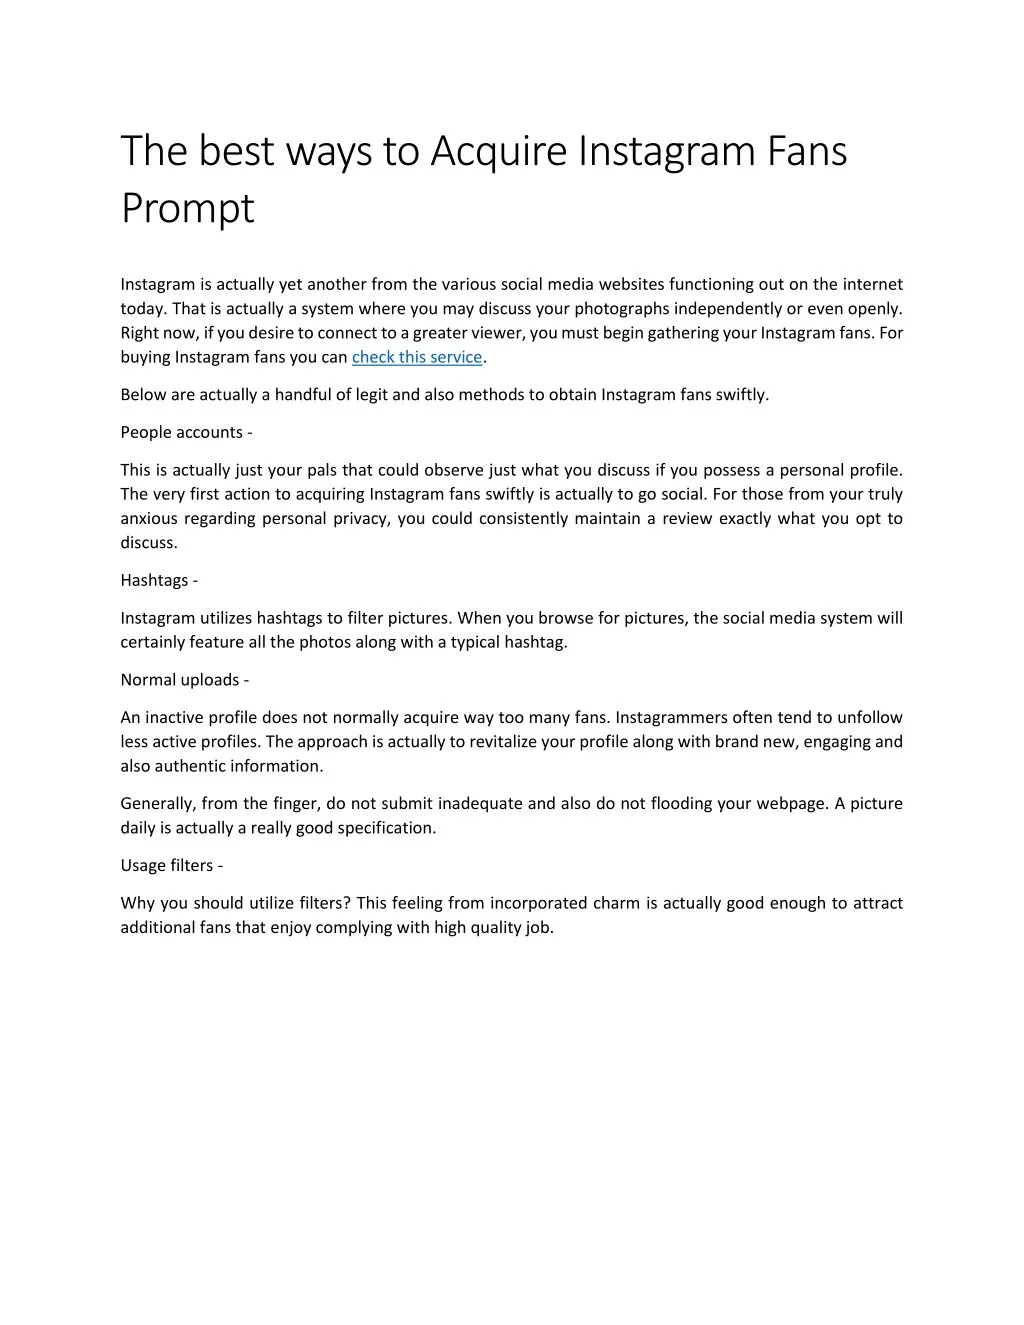 the best ways to acquire instagram fans prompt